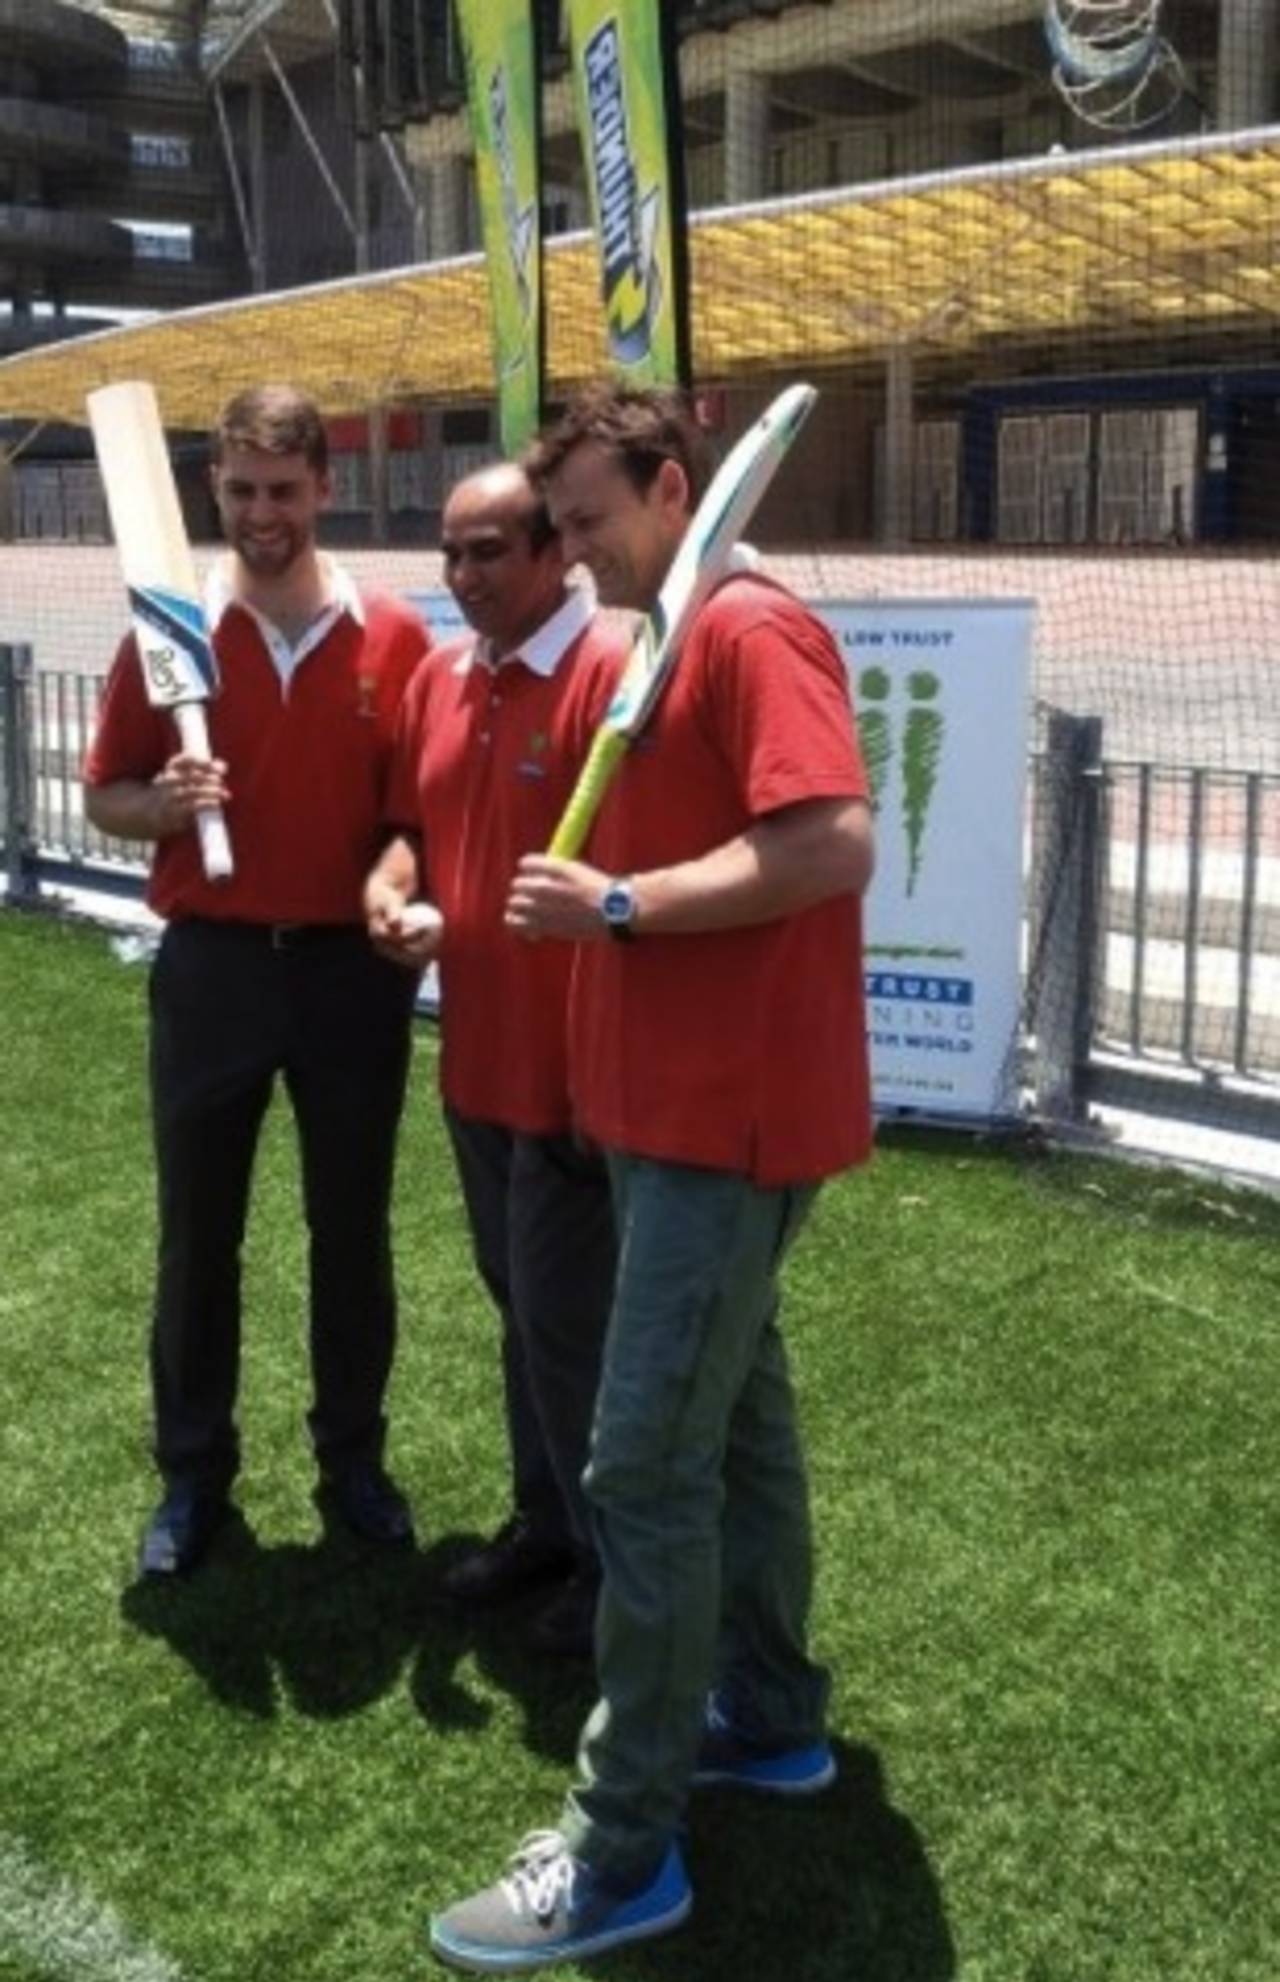 Sydney Thunder wicketkeeper Ryan Carters, LBW Trust chairman Darshak Mehta and former Test gloveman Adam Gilchrist at the launch of Batting for Change, Sydney, December 21